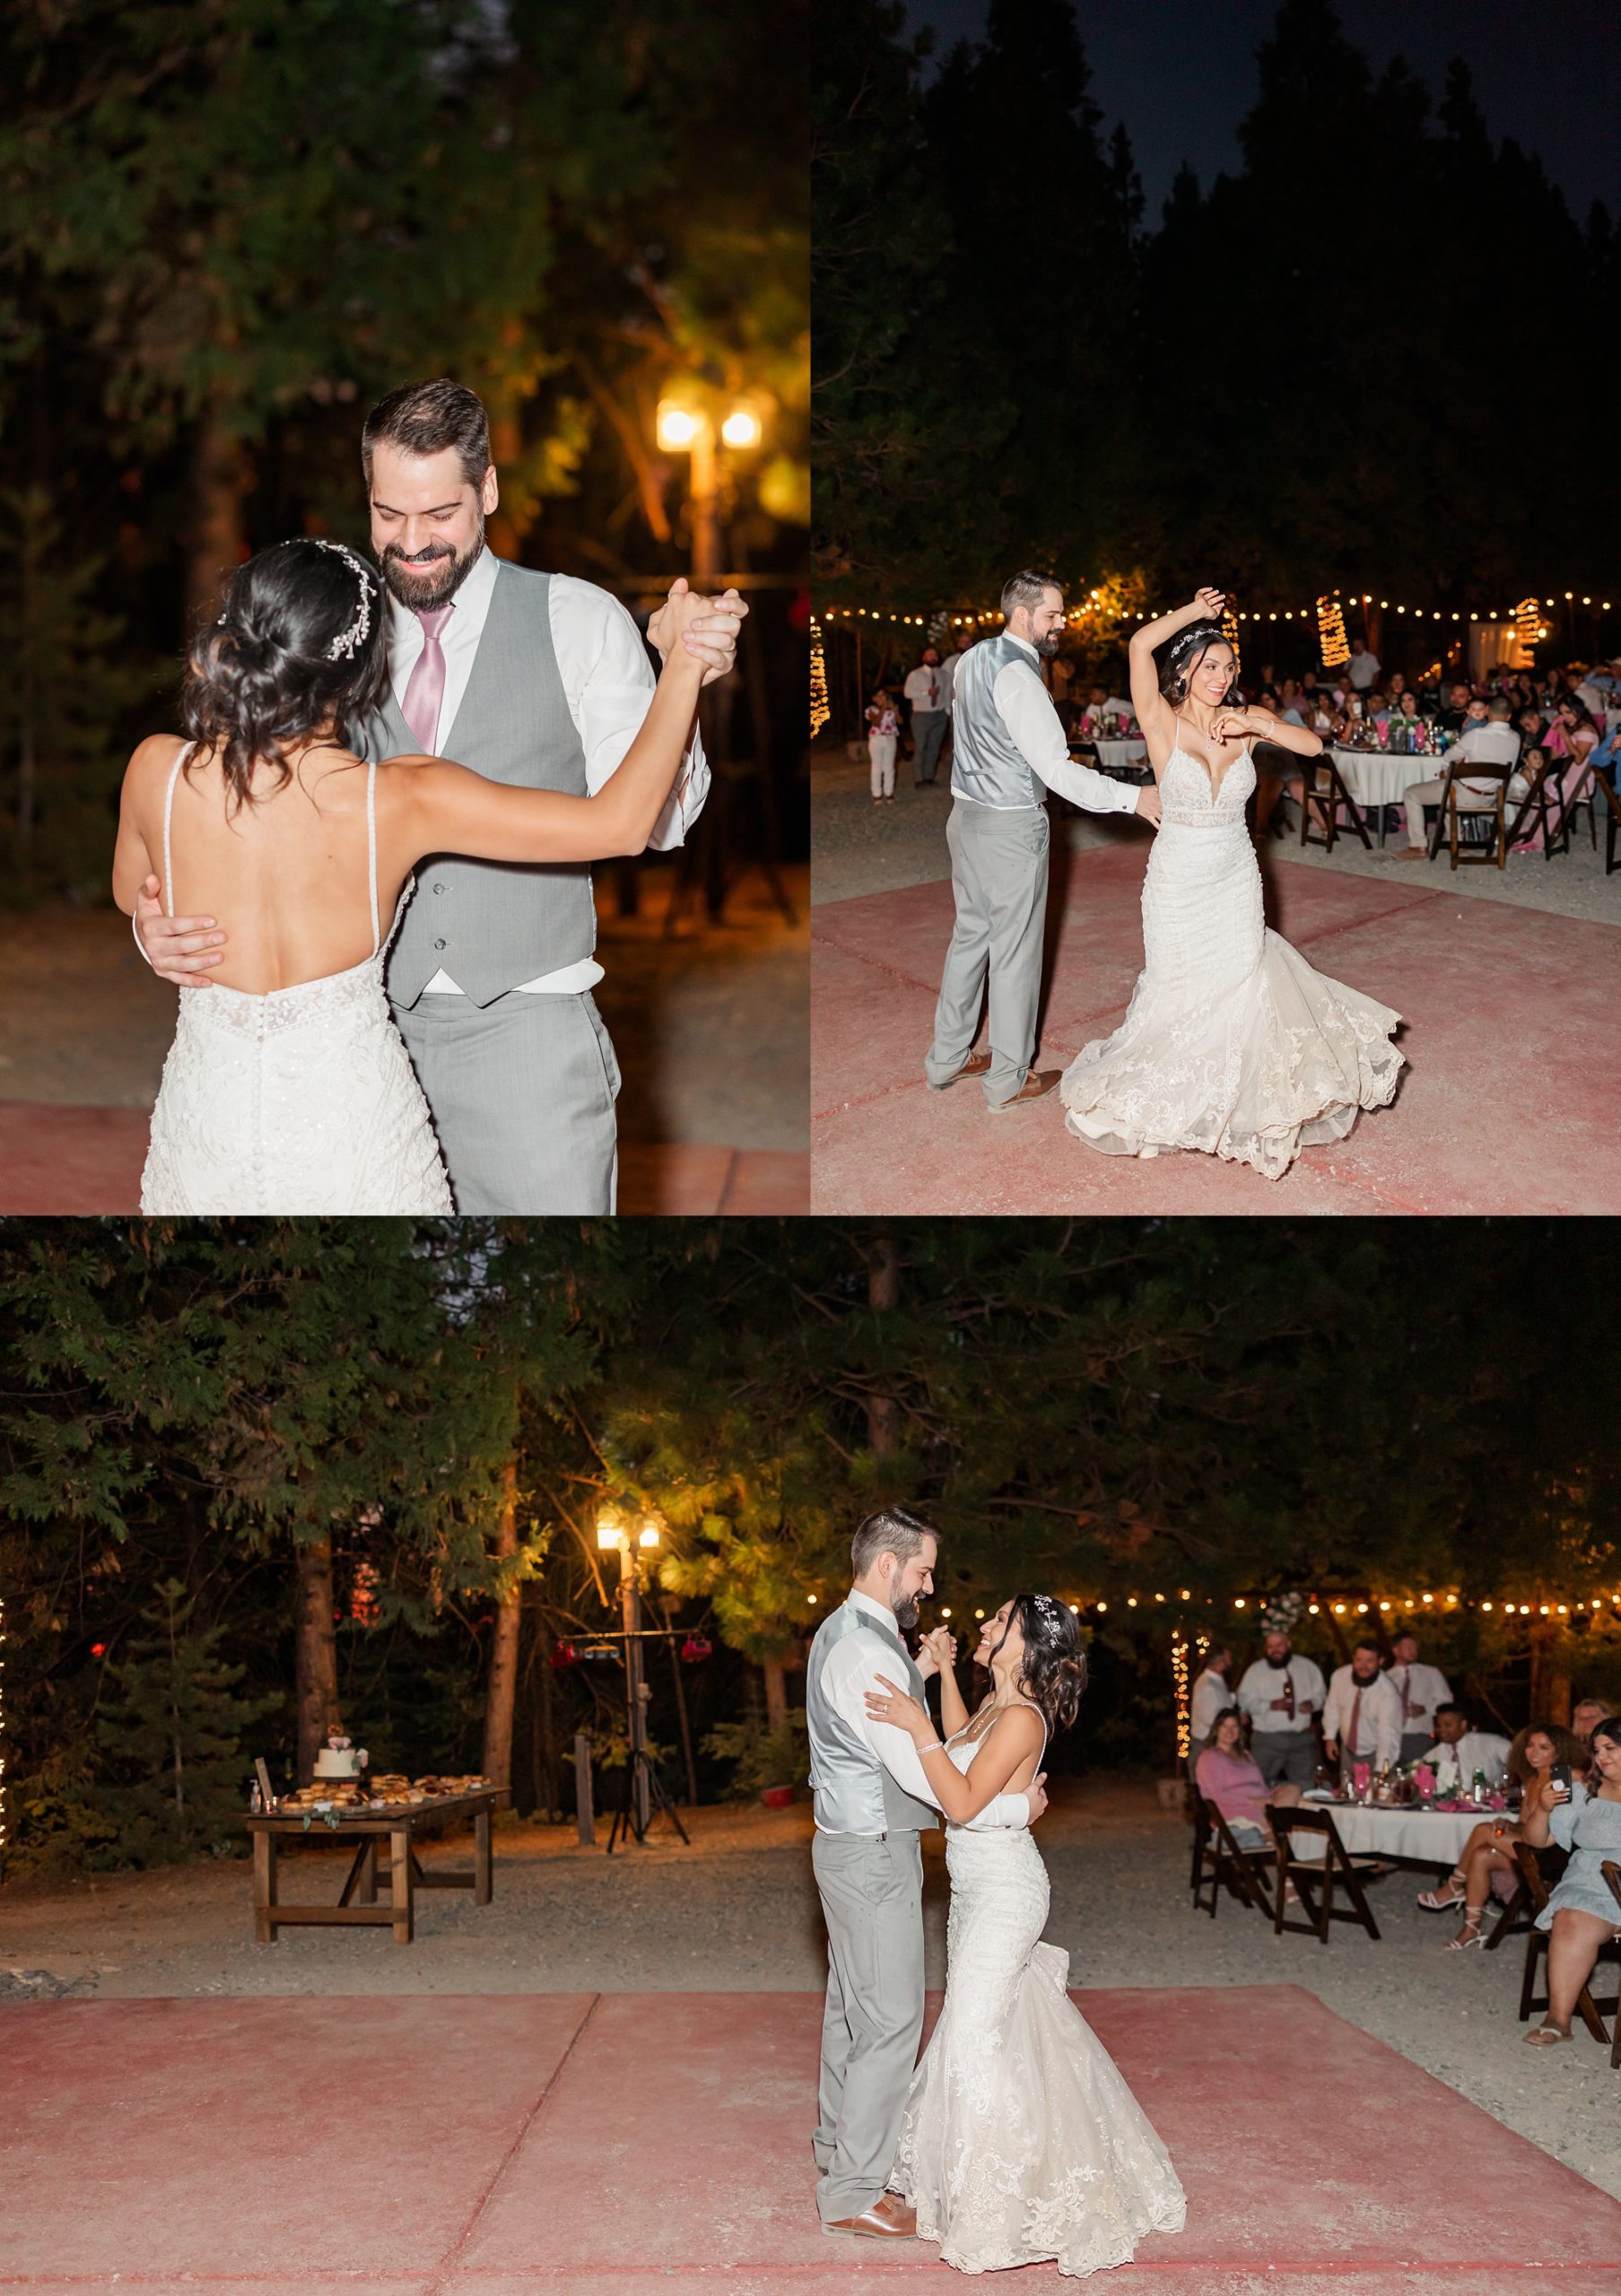 Bride and Groom first dance at wedding reception